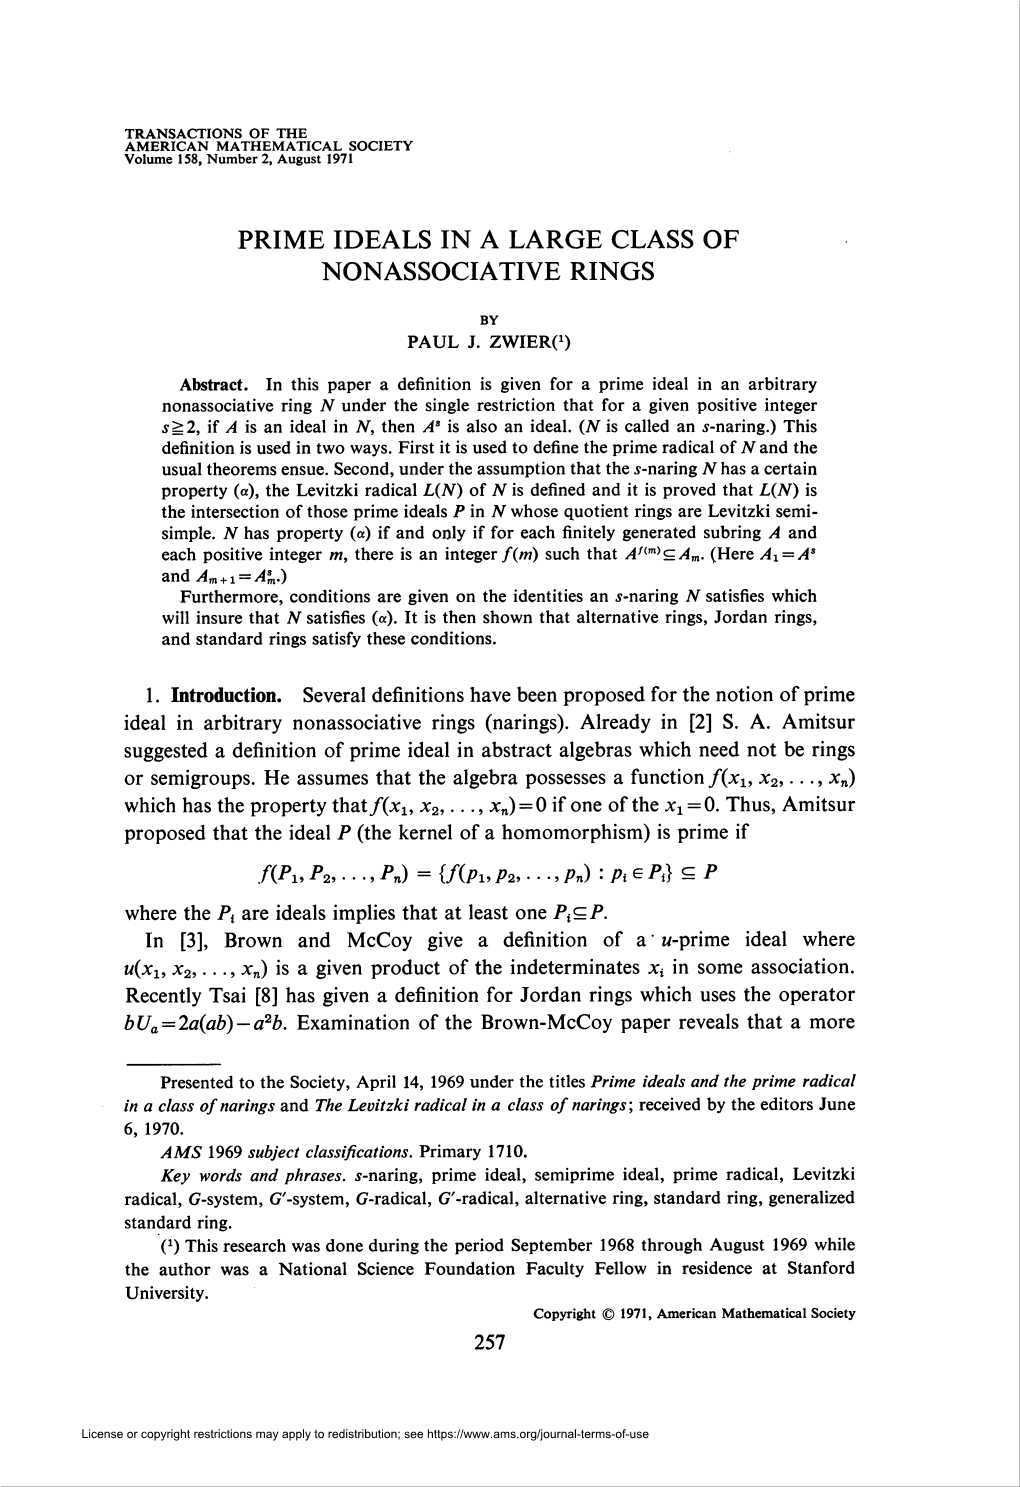 Prime Ideals in a Large Class of Nonassociative Rings